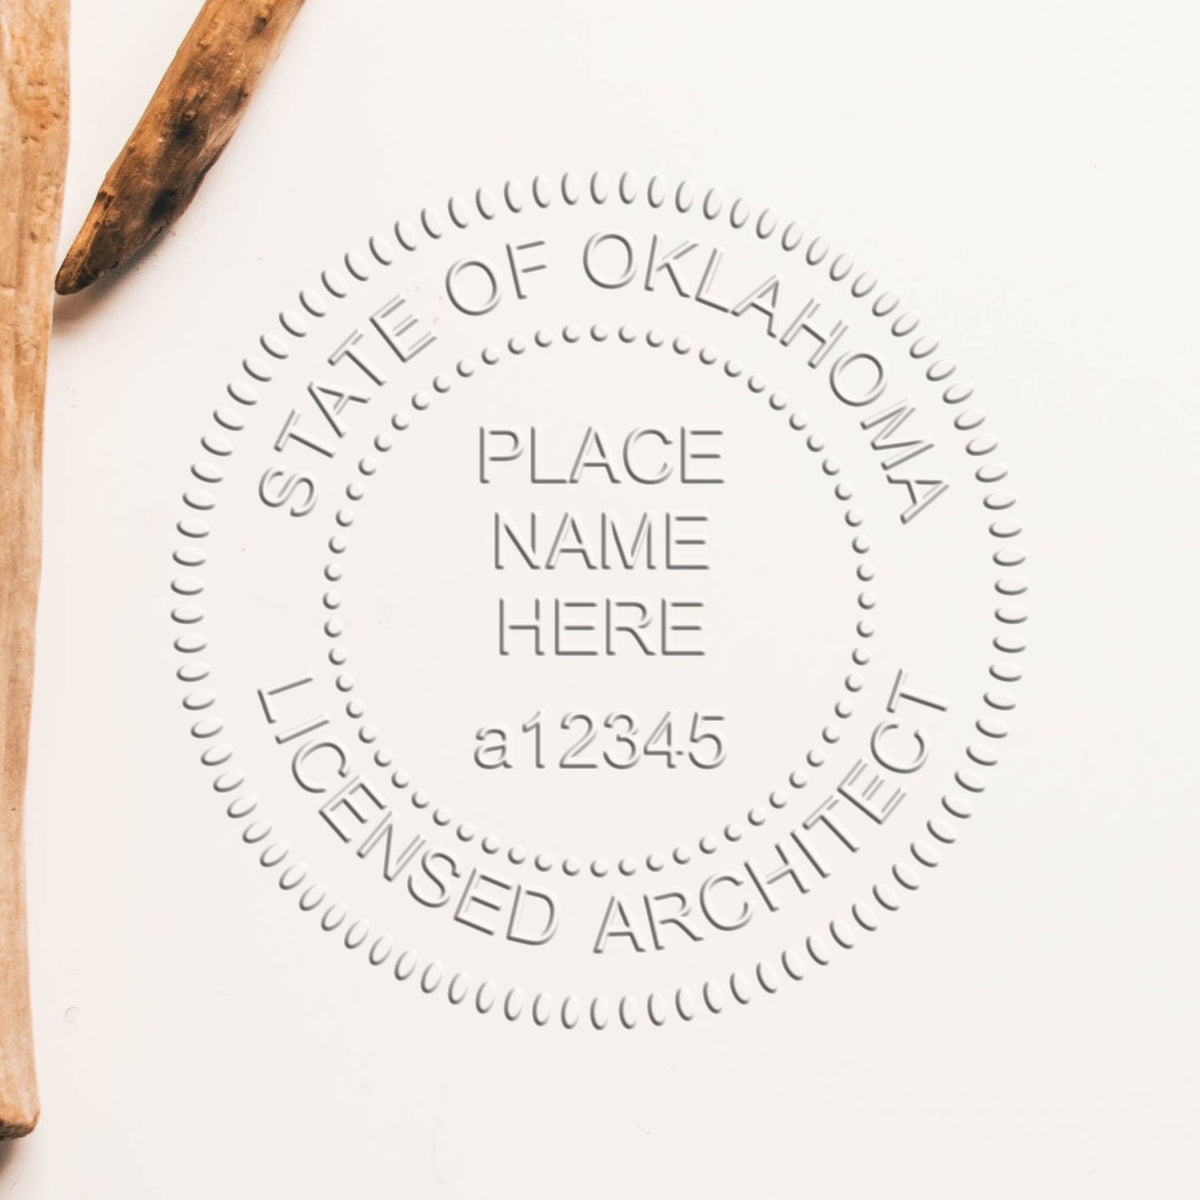 A photograph of the Hybrid Oklahoma Architect Seal stamp impression reveals a vivid, professional image of the on paper.